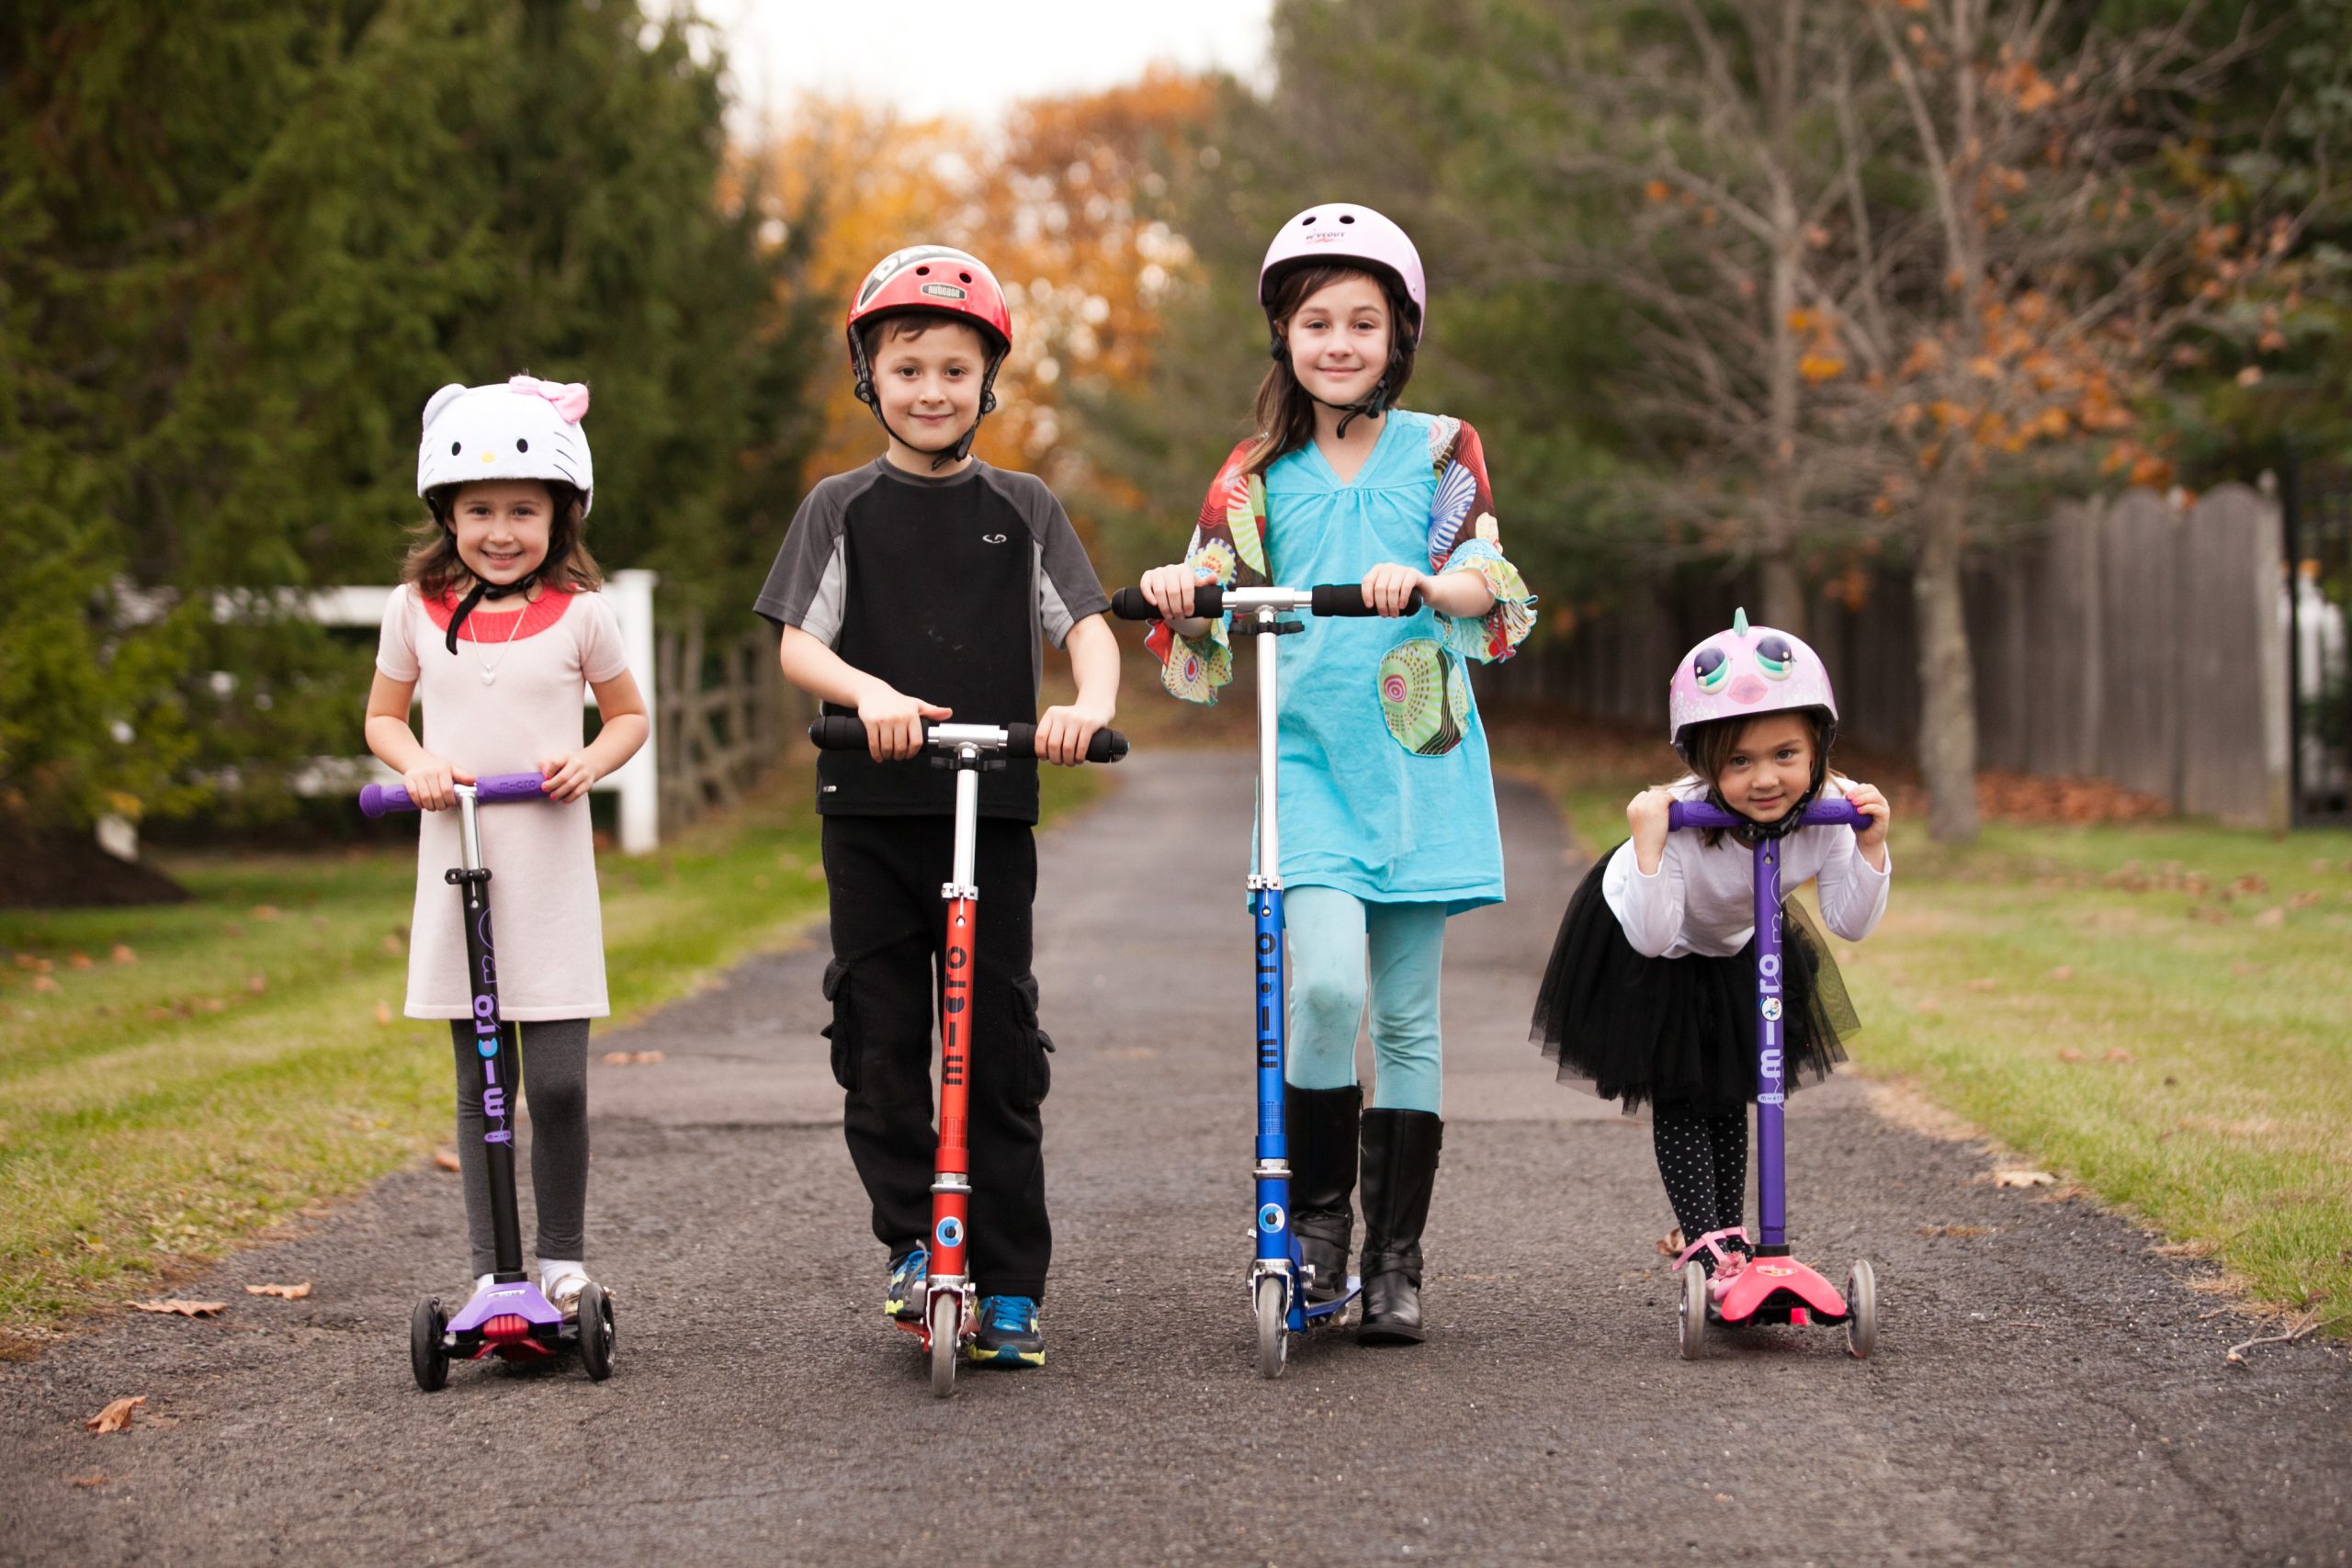 Next-Level Outdoor Play With Three-Wheeled Scooters